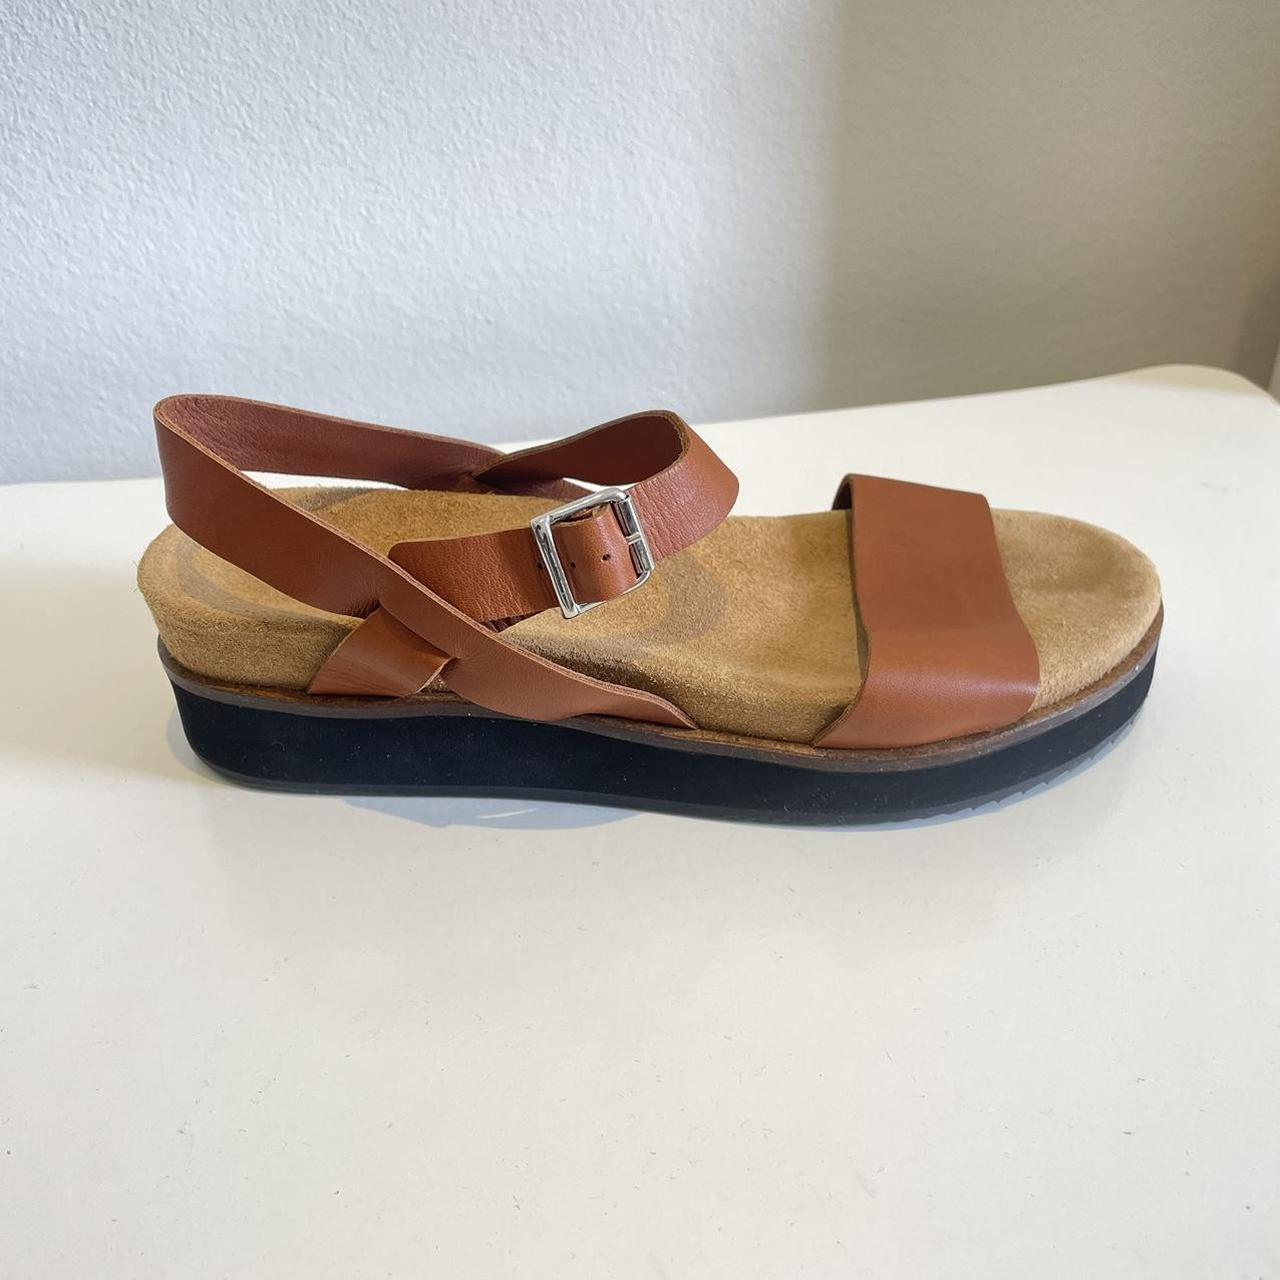 WHISTLES chunky tan leather sandals with contrasting... - Depop